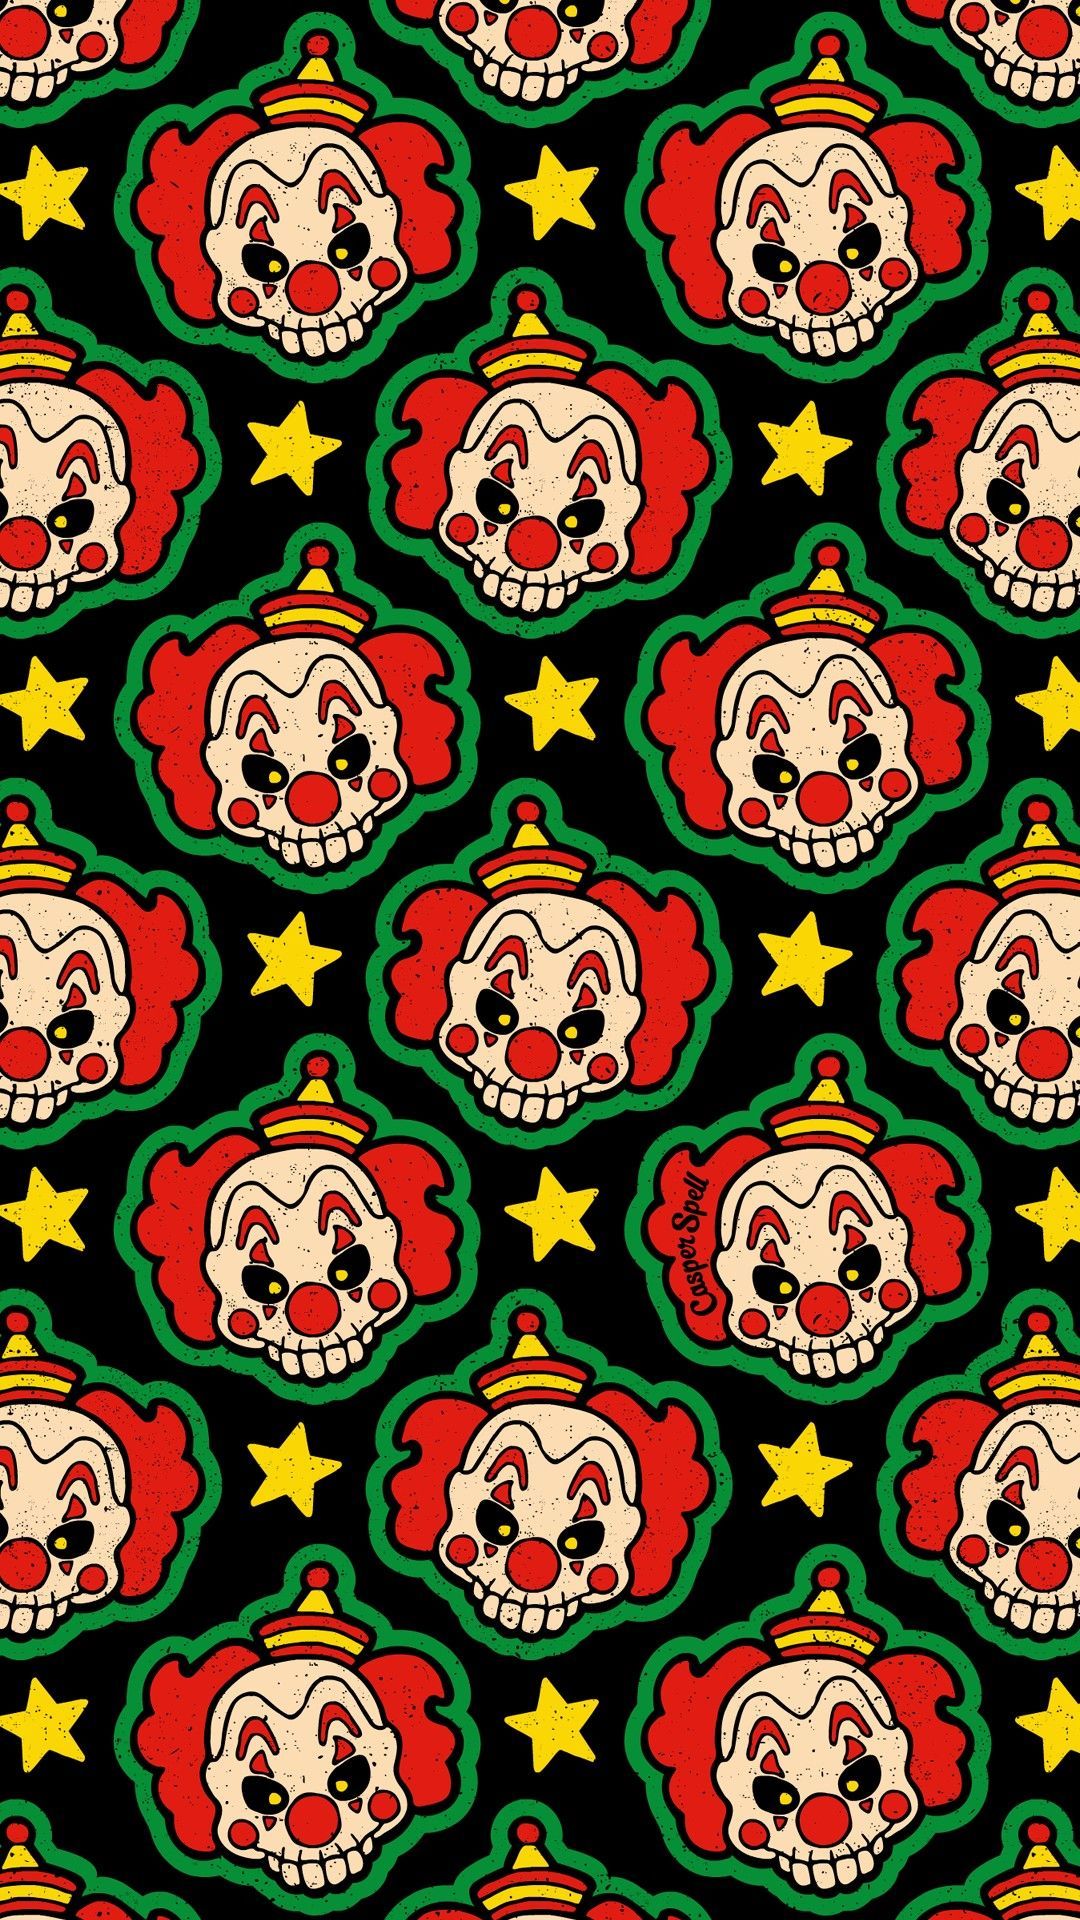 A pattern of clown skulls with red hair and yellow stars on a black background - Clown